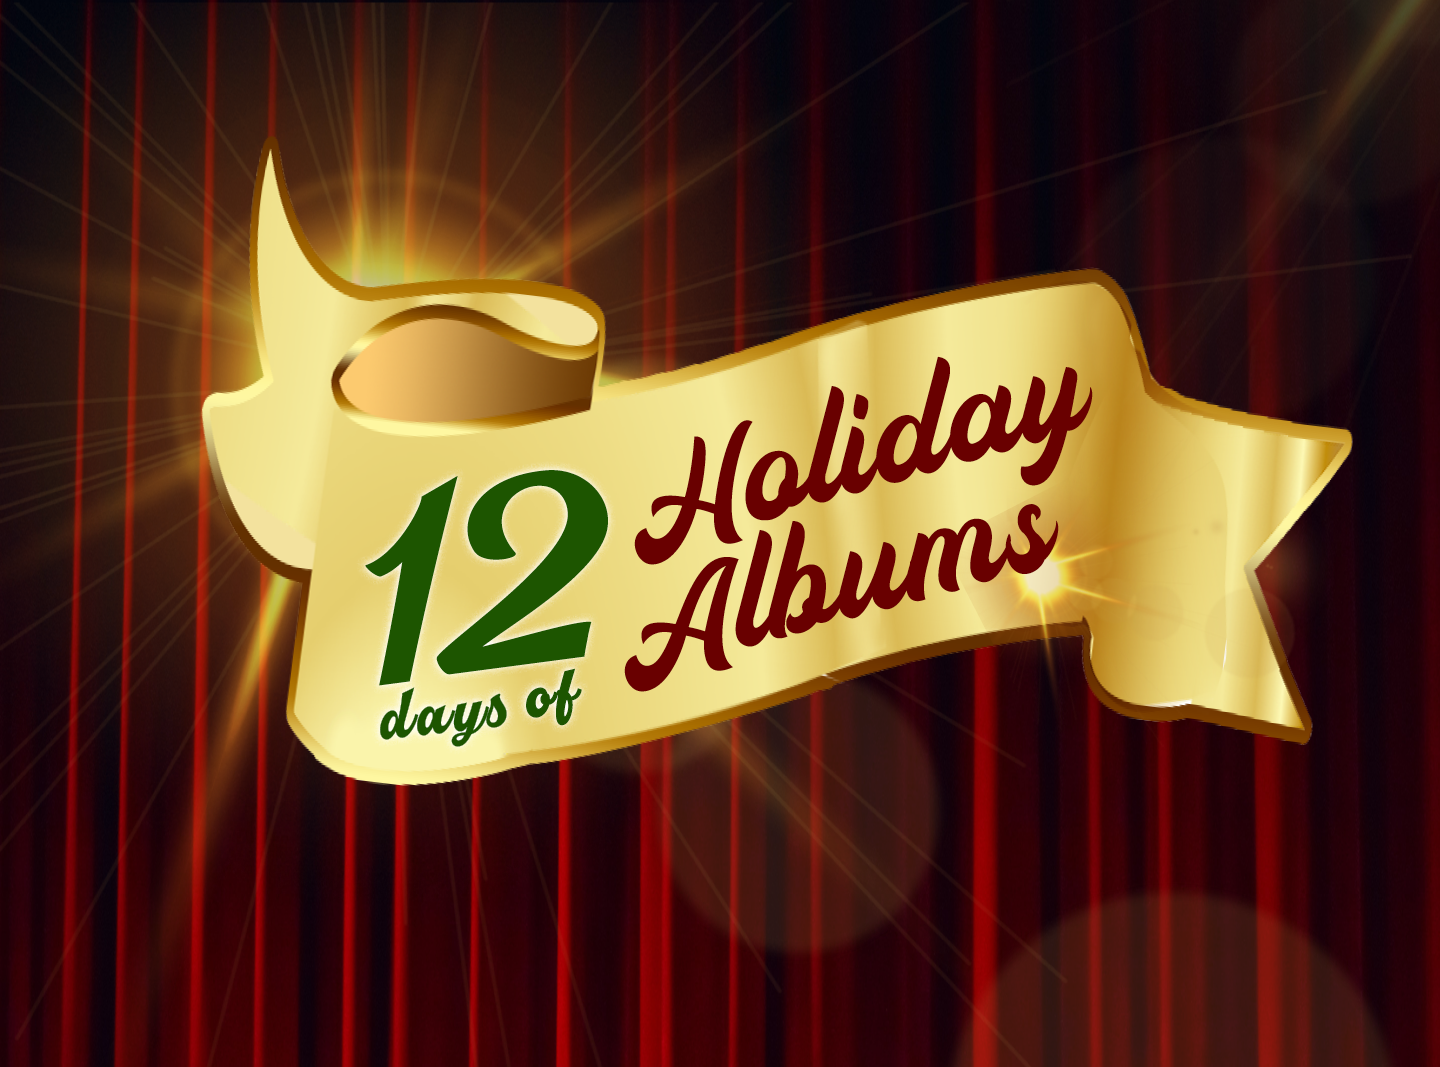 More Info for The 12 Days of Holiday Albums